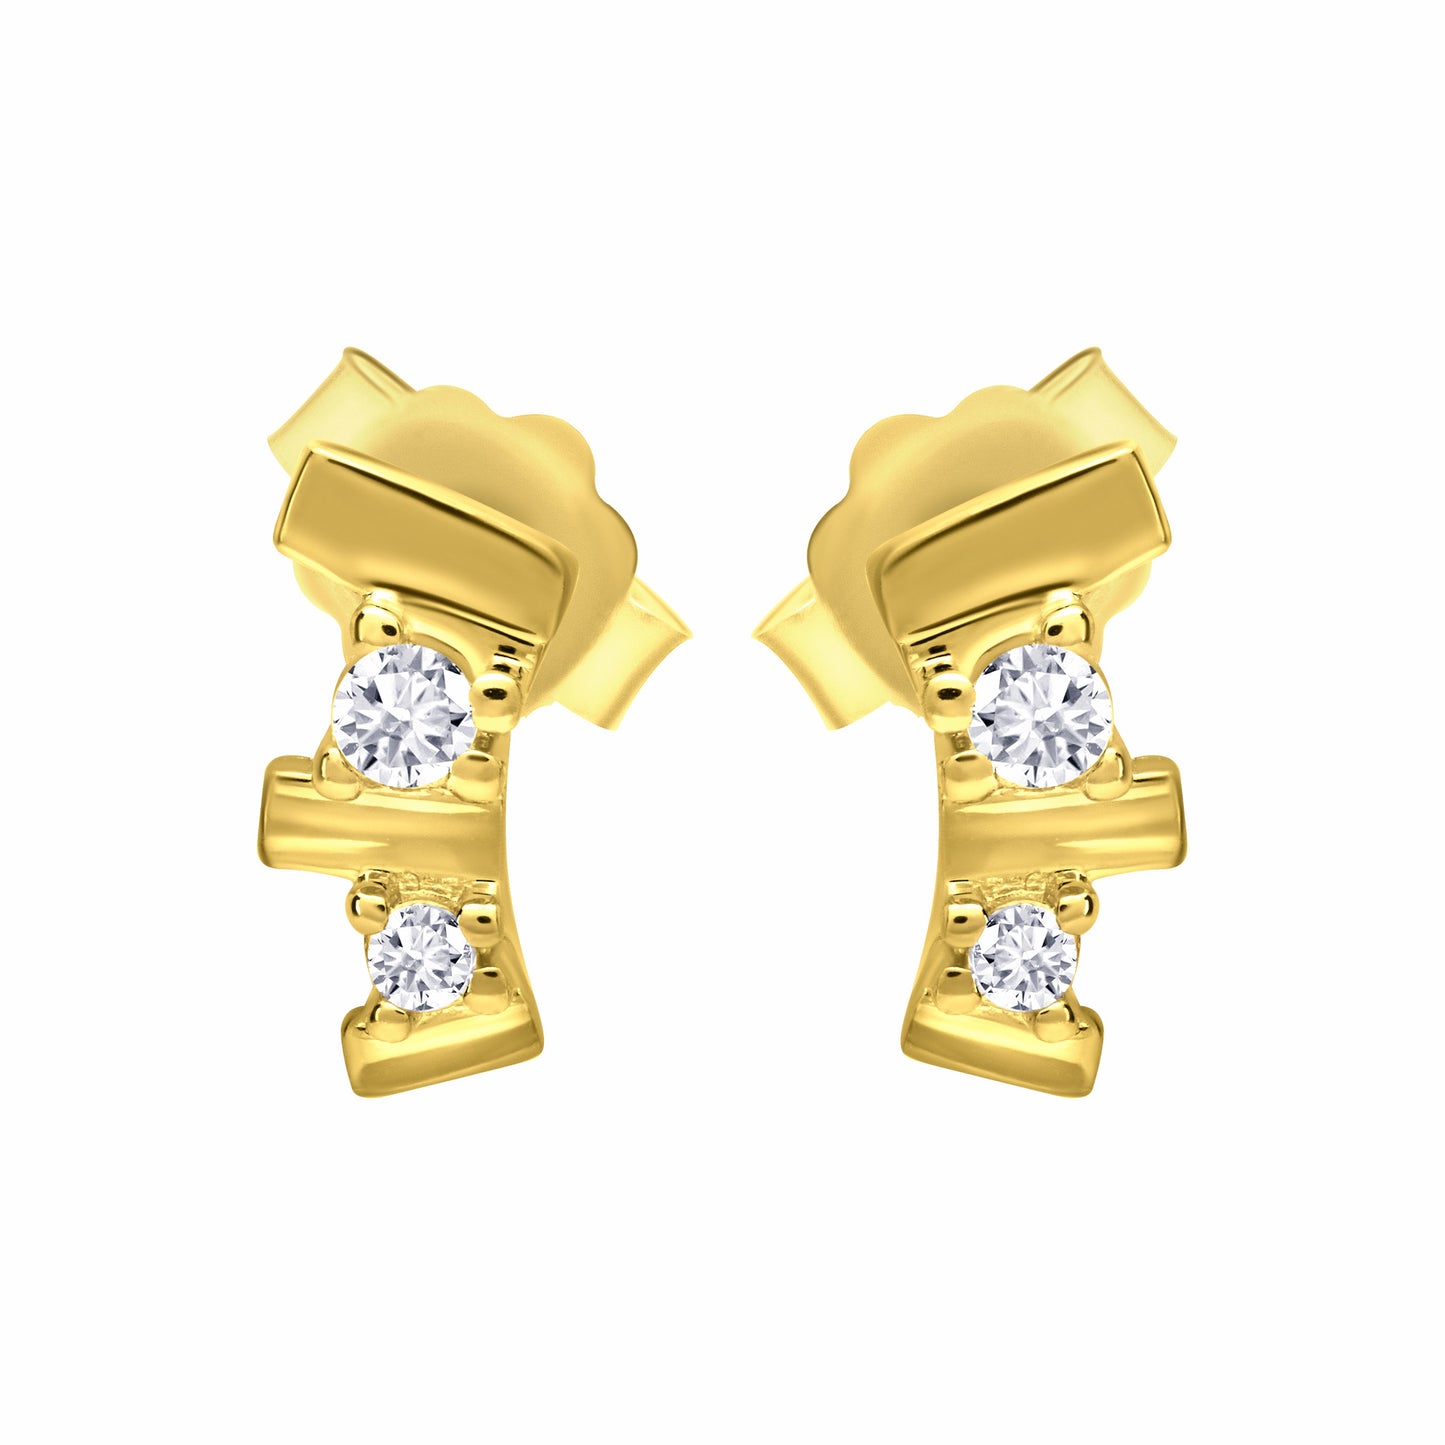 Trilogy Gold Earrings on white background